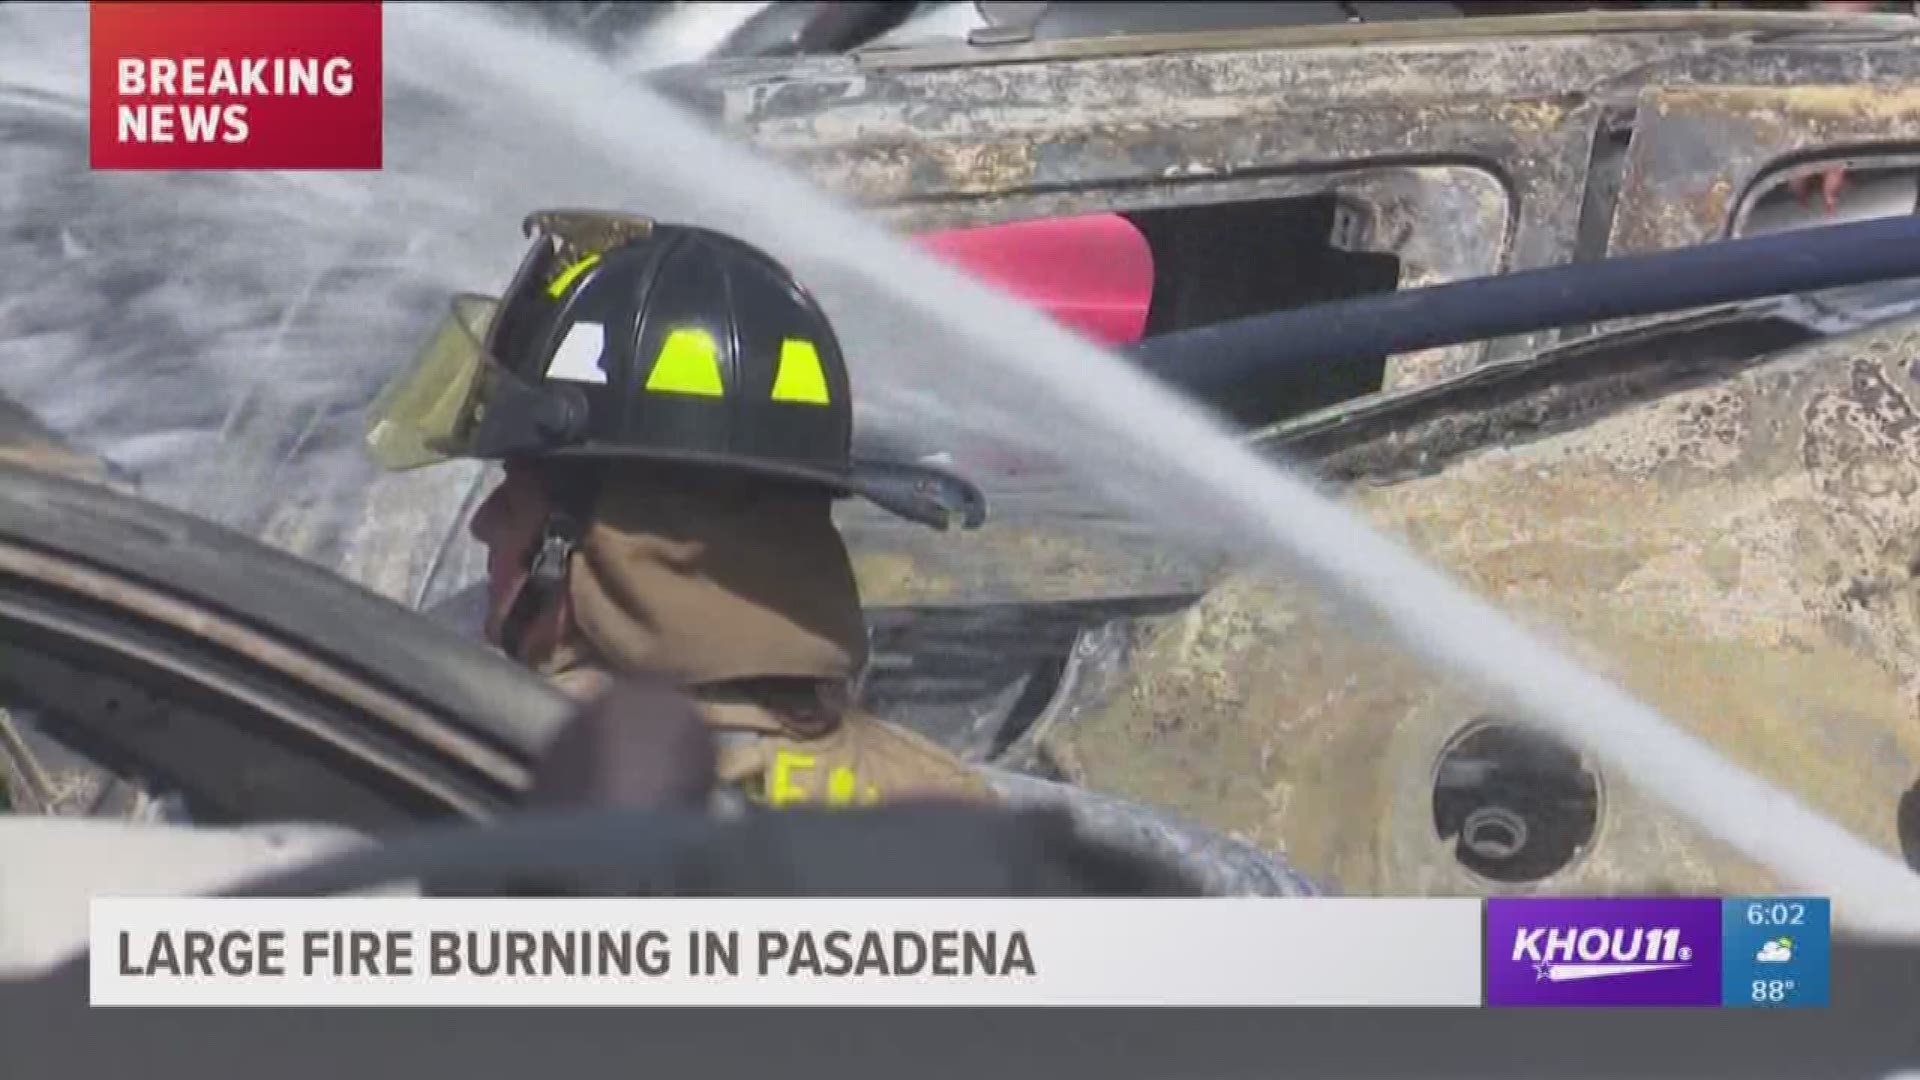 This was a massive fire at a scrap yard in Pasadena. Firefighters say 40-50 cars burned at this scene.